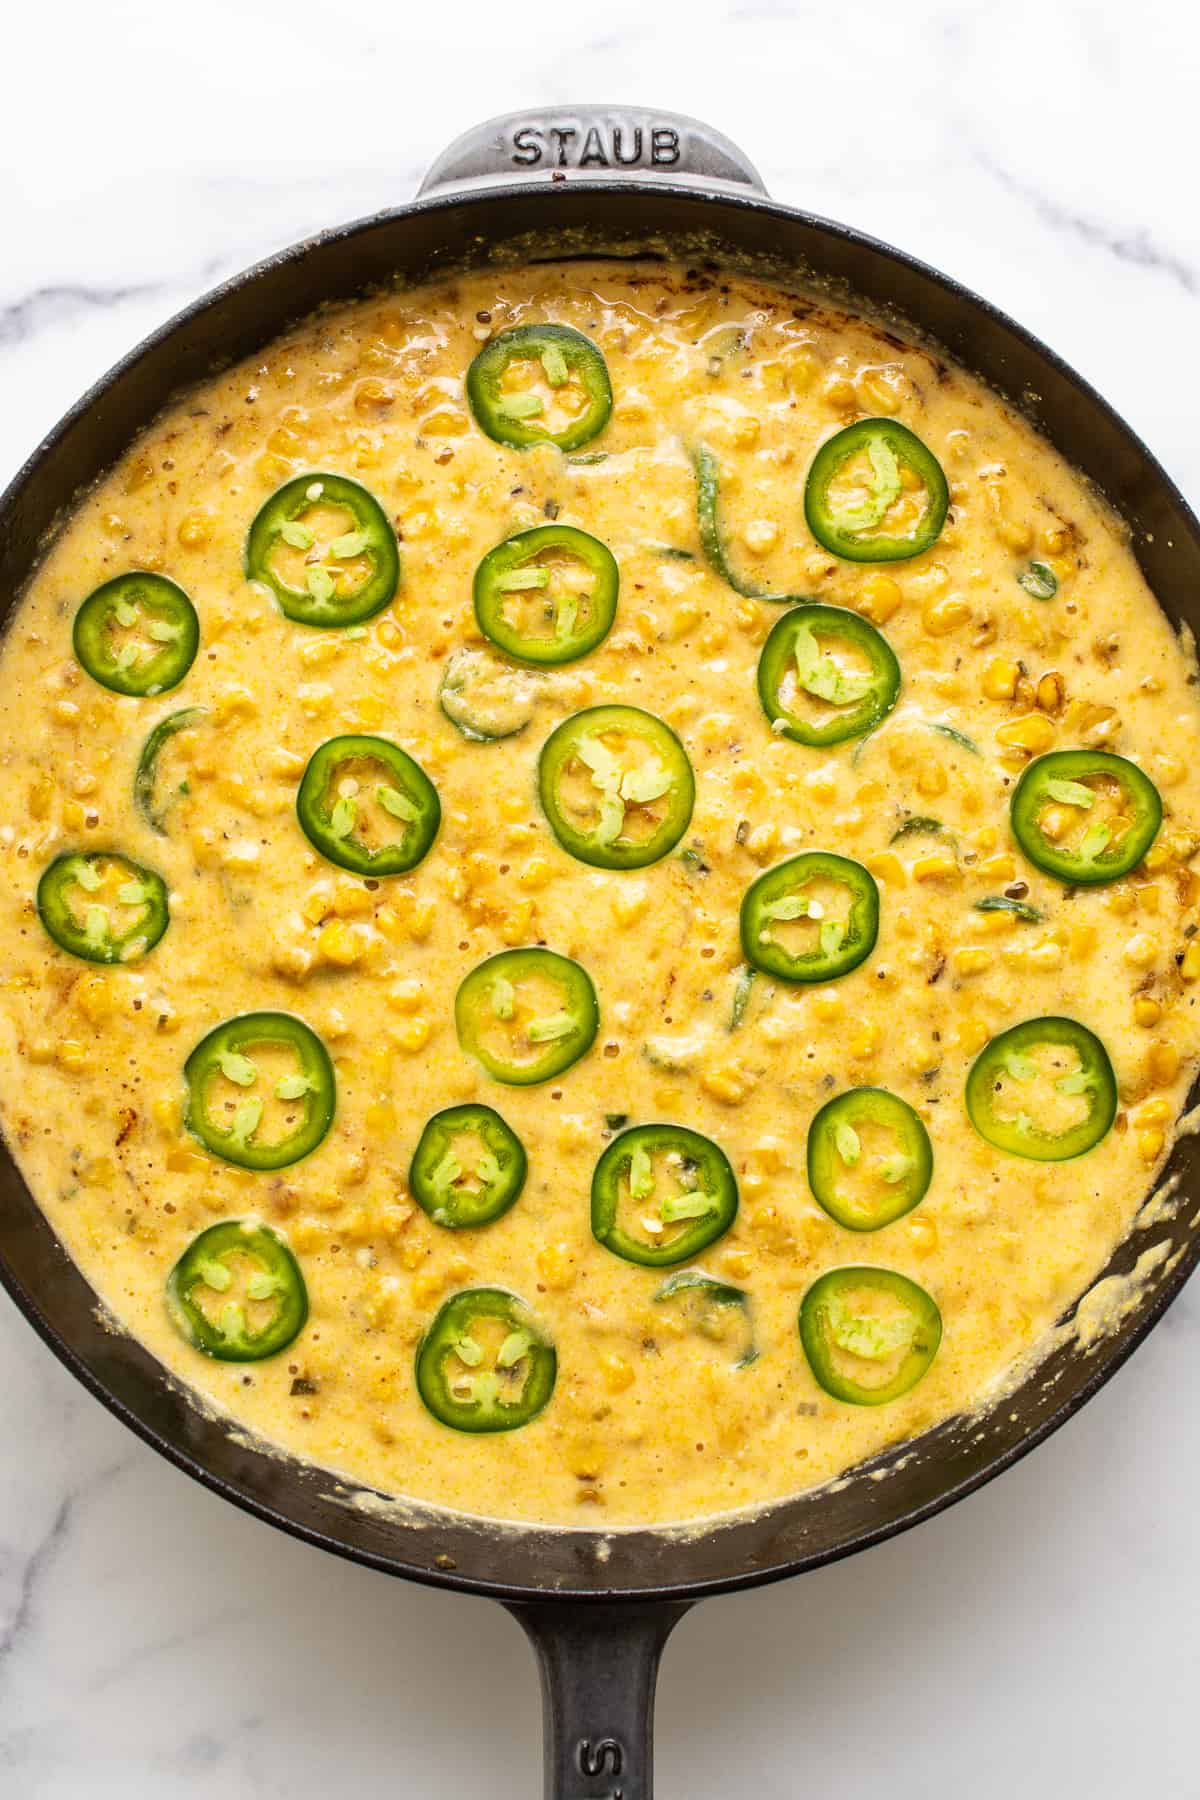 Jalapeno corn pudding in a cast iron skillet ready to be baked.